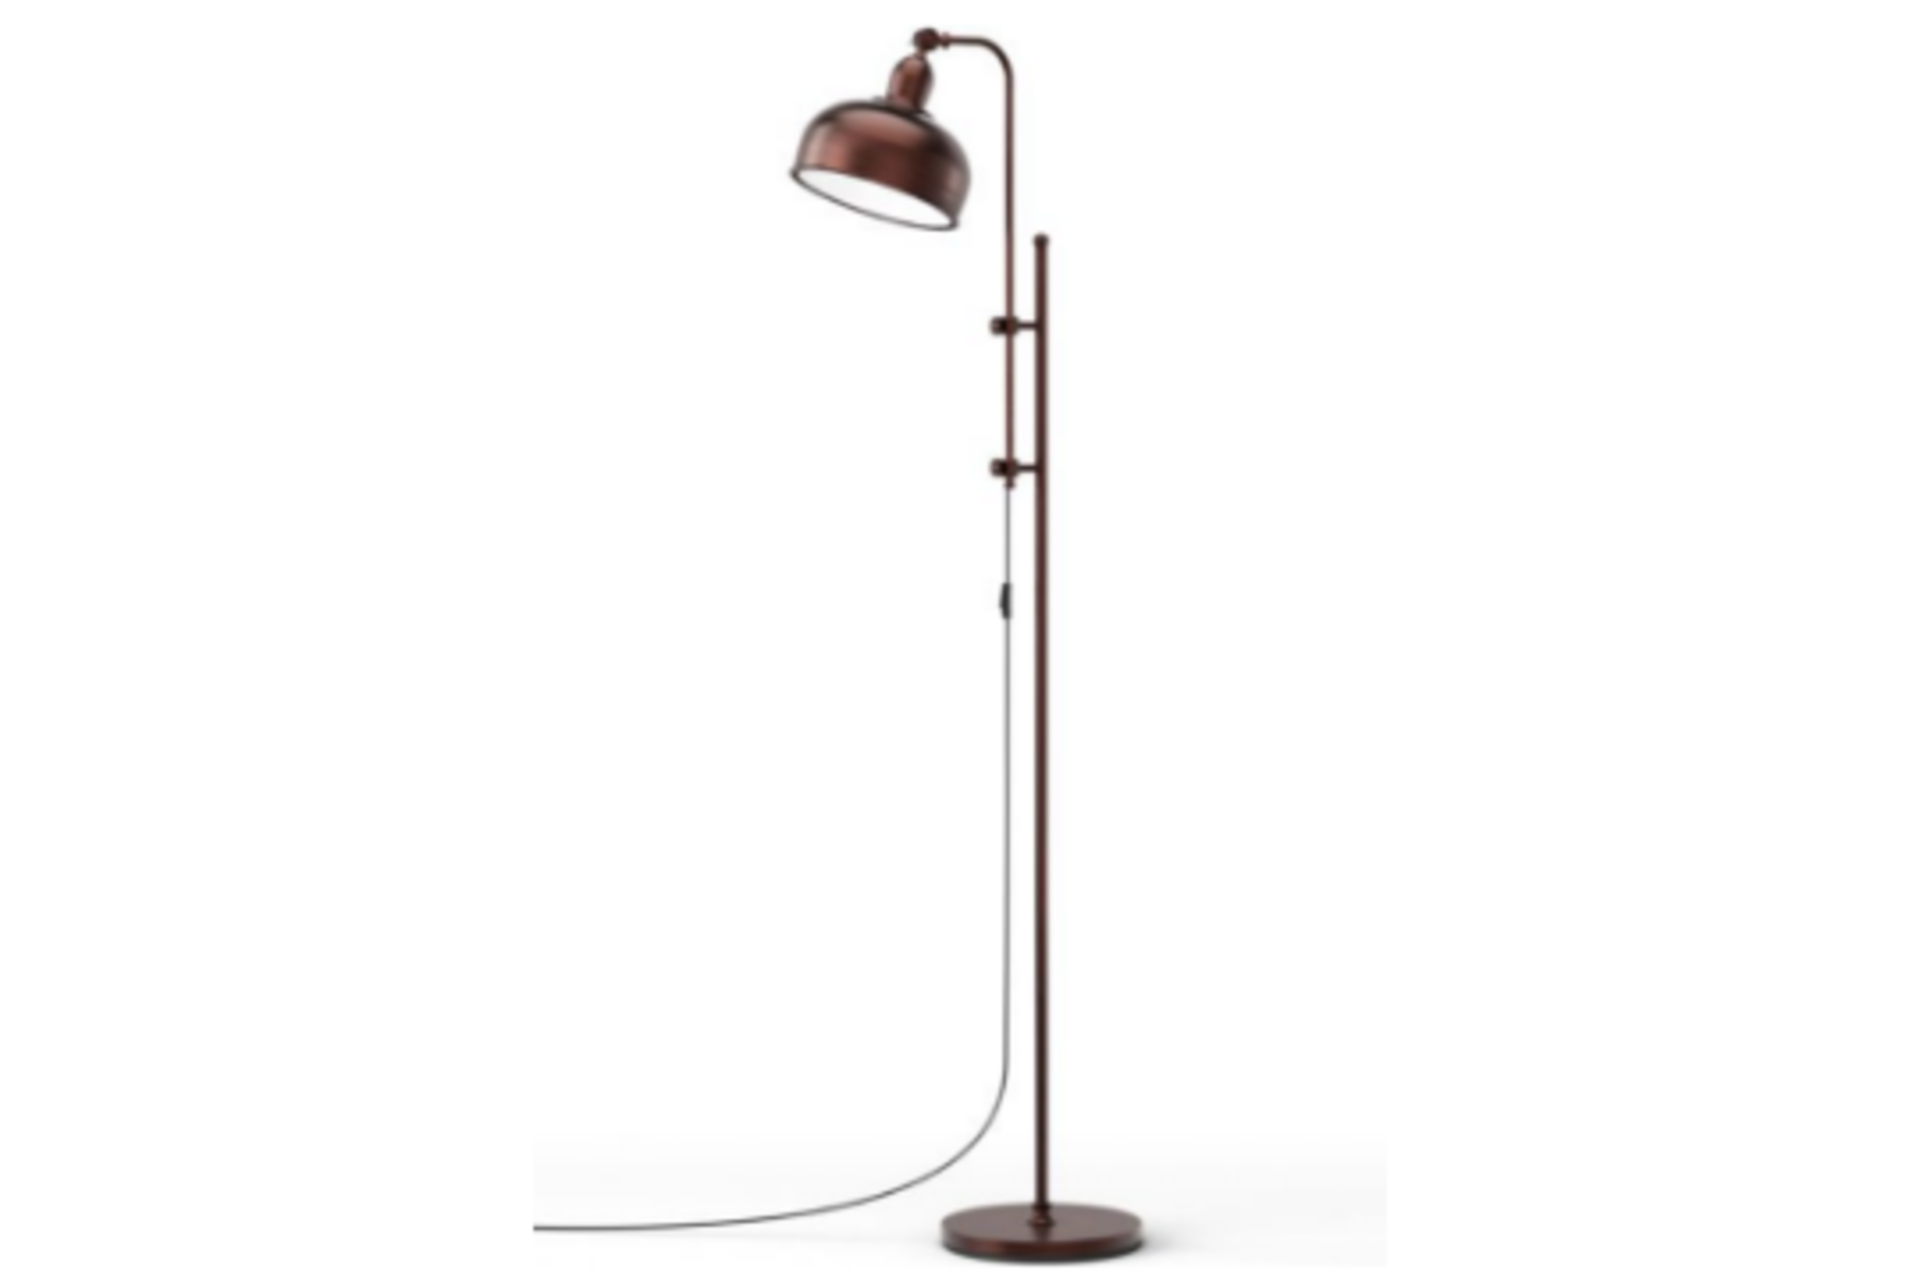 Industrial Floor Lamp with Adjustable Height and Lamp Head for Home Office (R50)This floor lamp is a